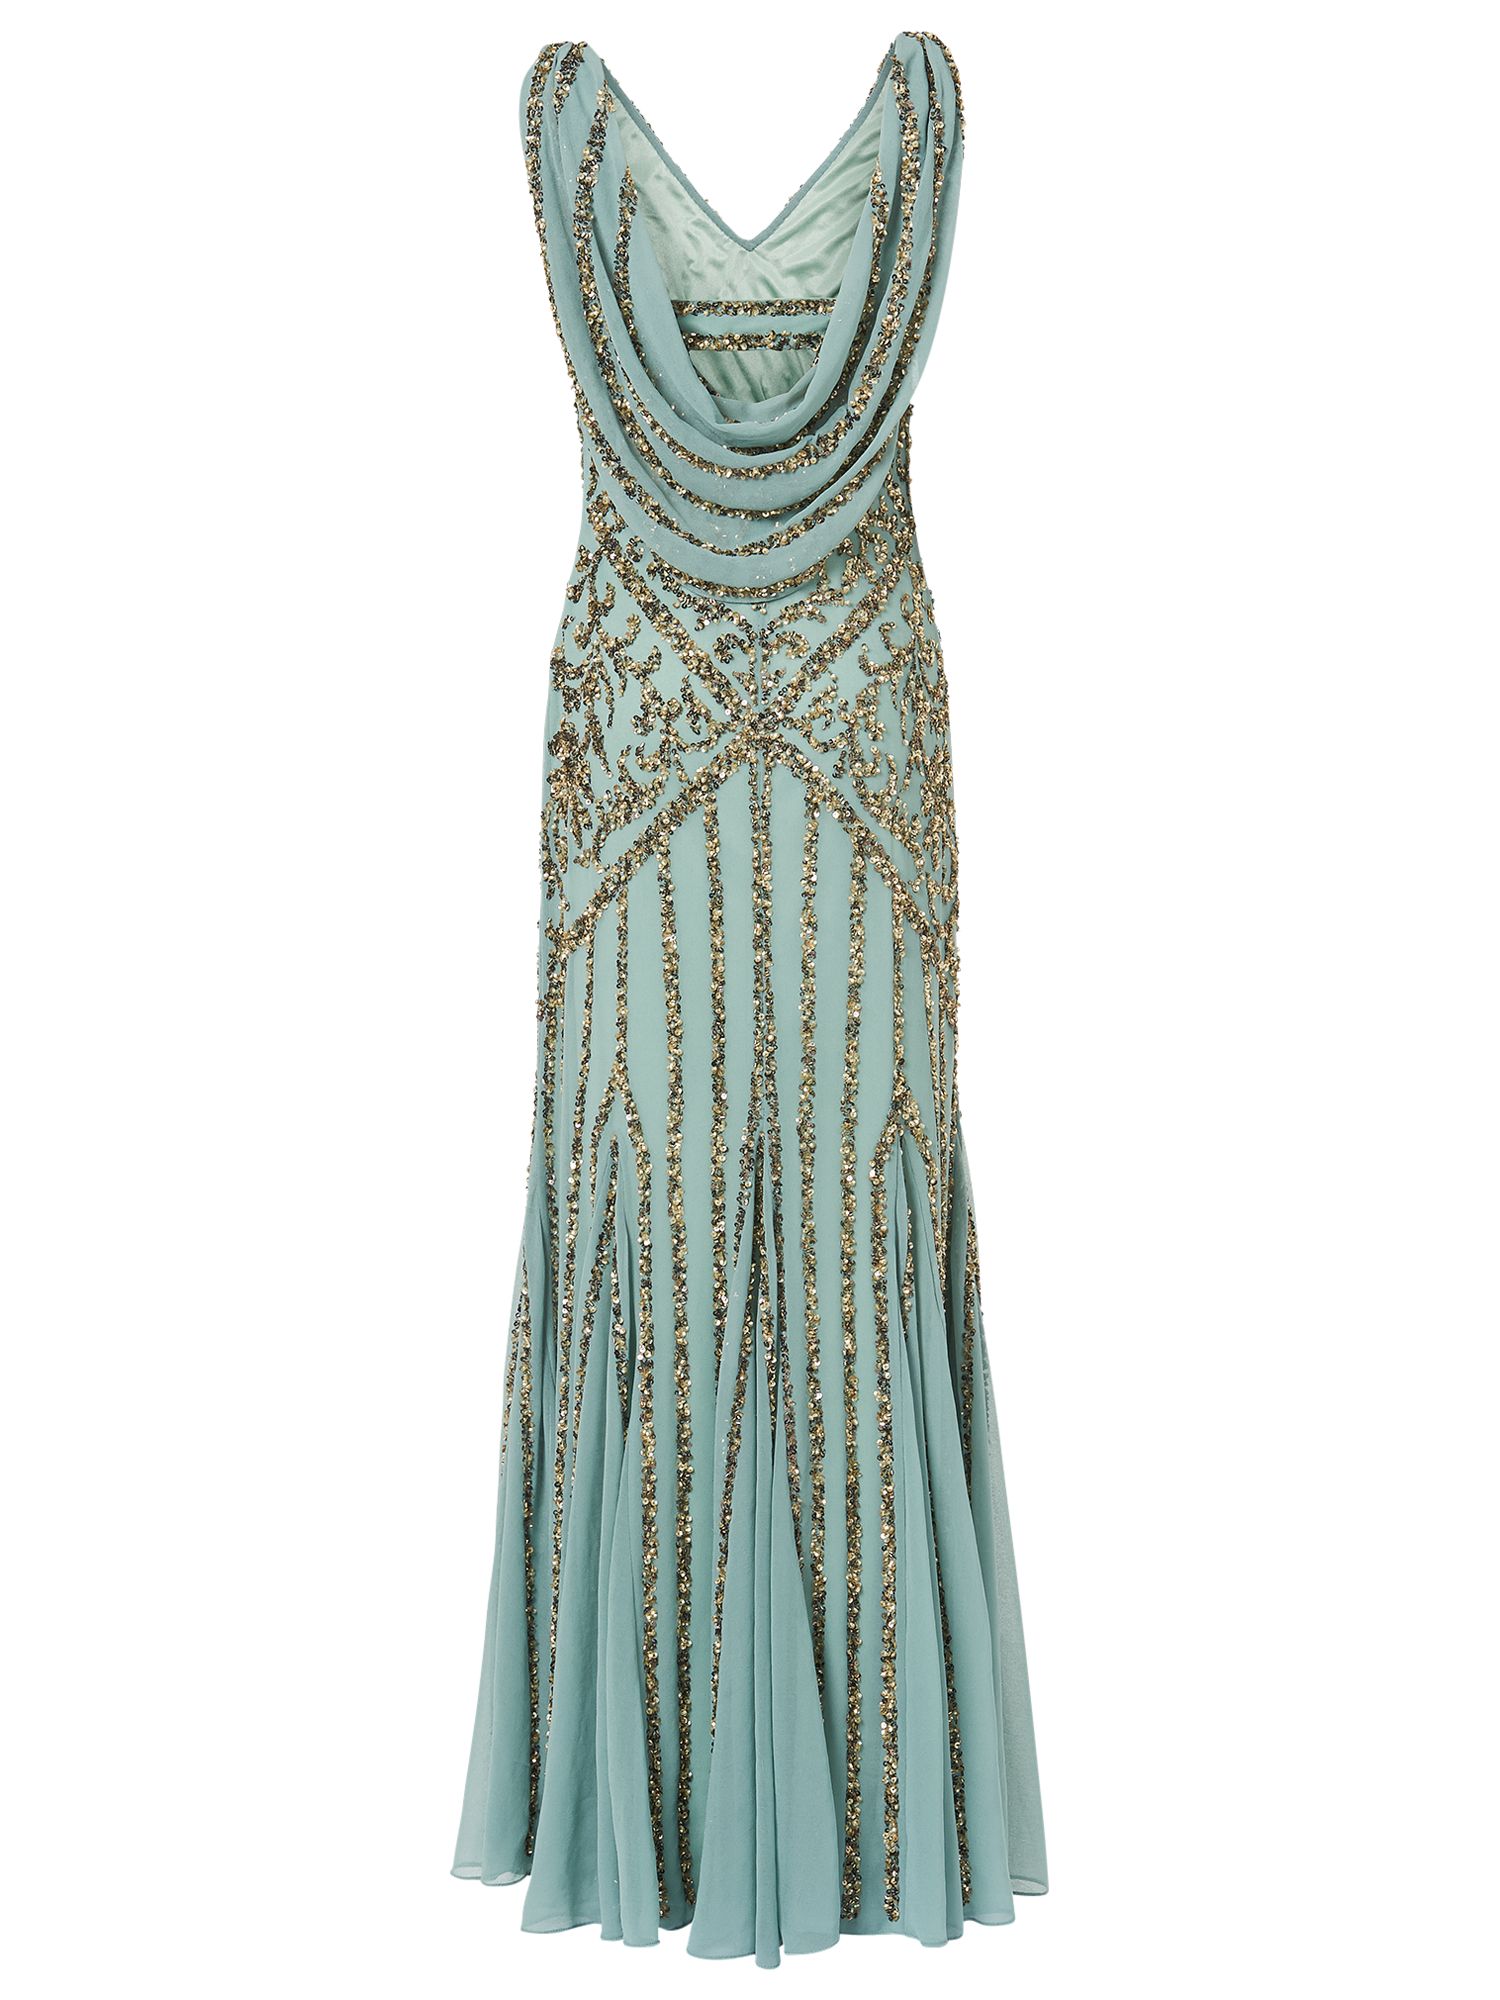 Phase Eight Collection 8 Benissa Embellished Dress, Mint at John Lewis ...